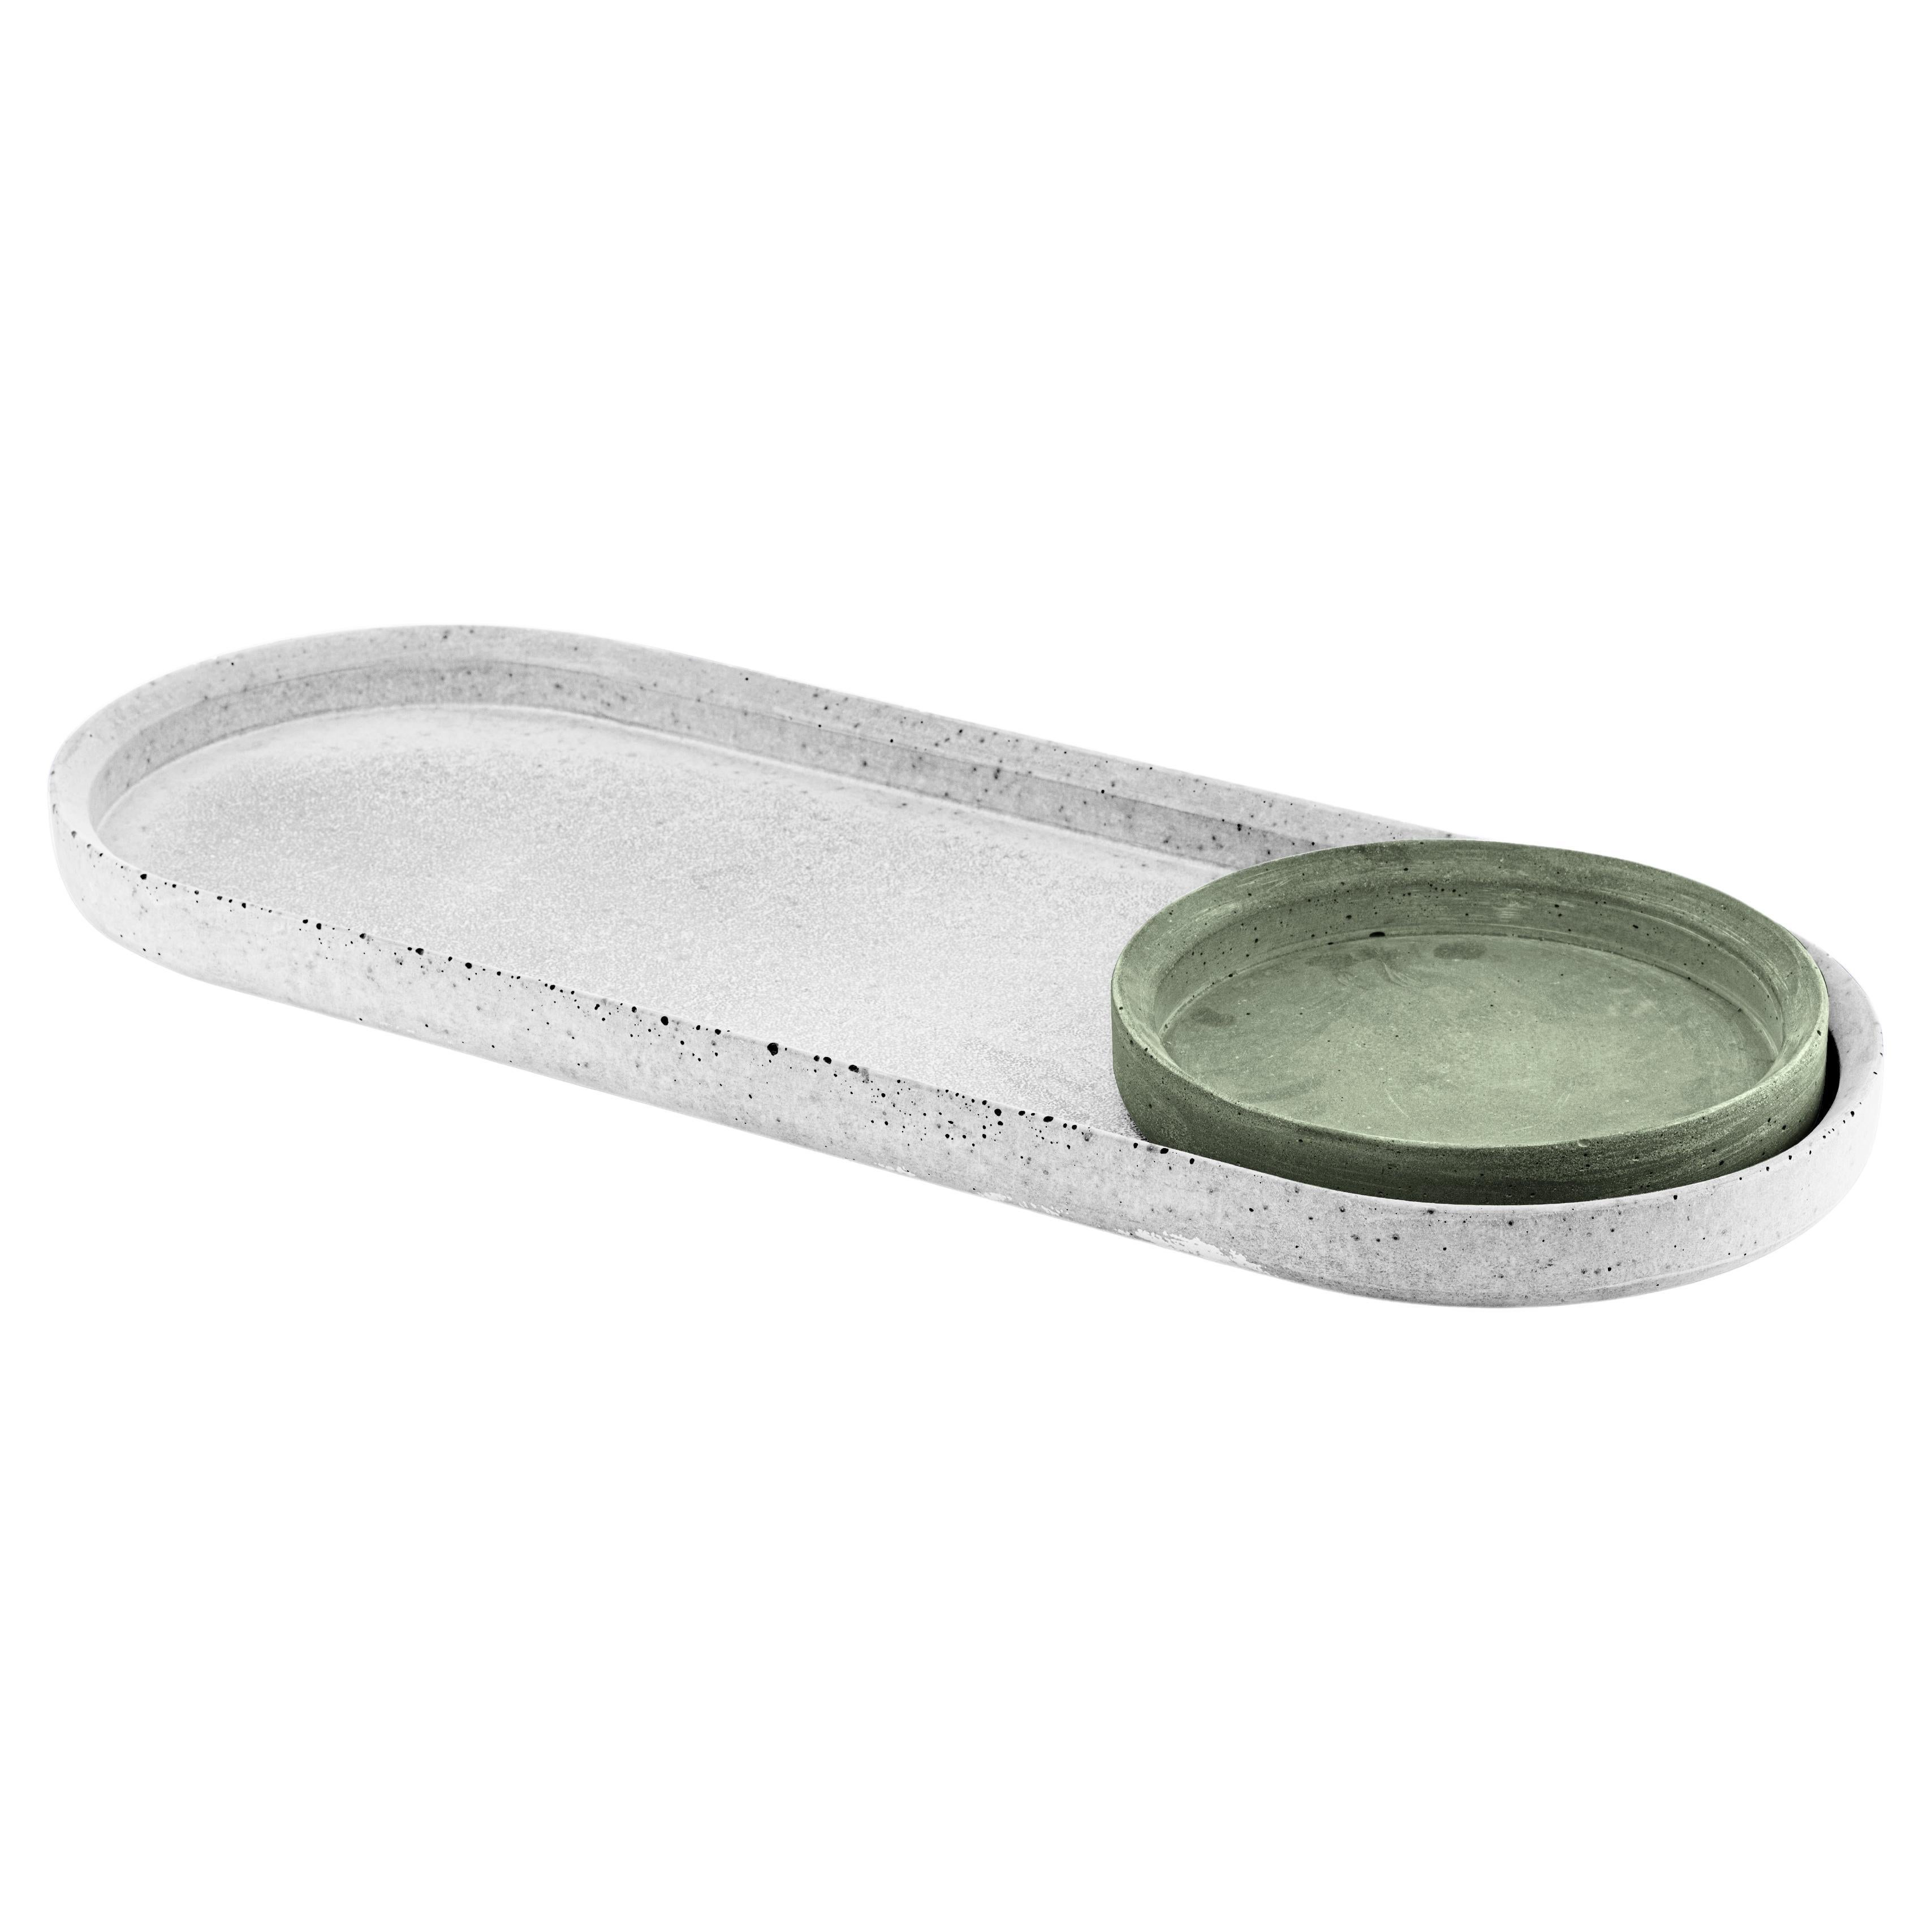 Renzo Set Concrete Tray Made in Italy White & Green Cement Christmas Edition For Sale